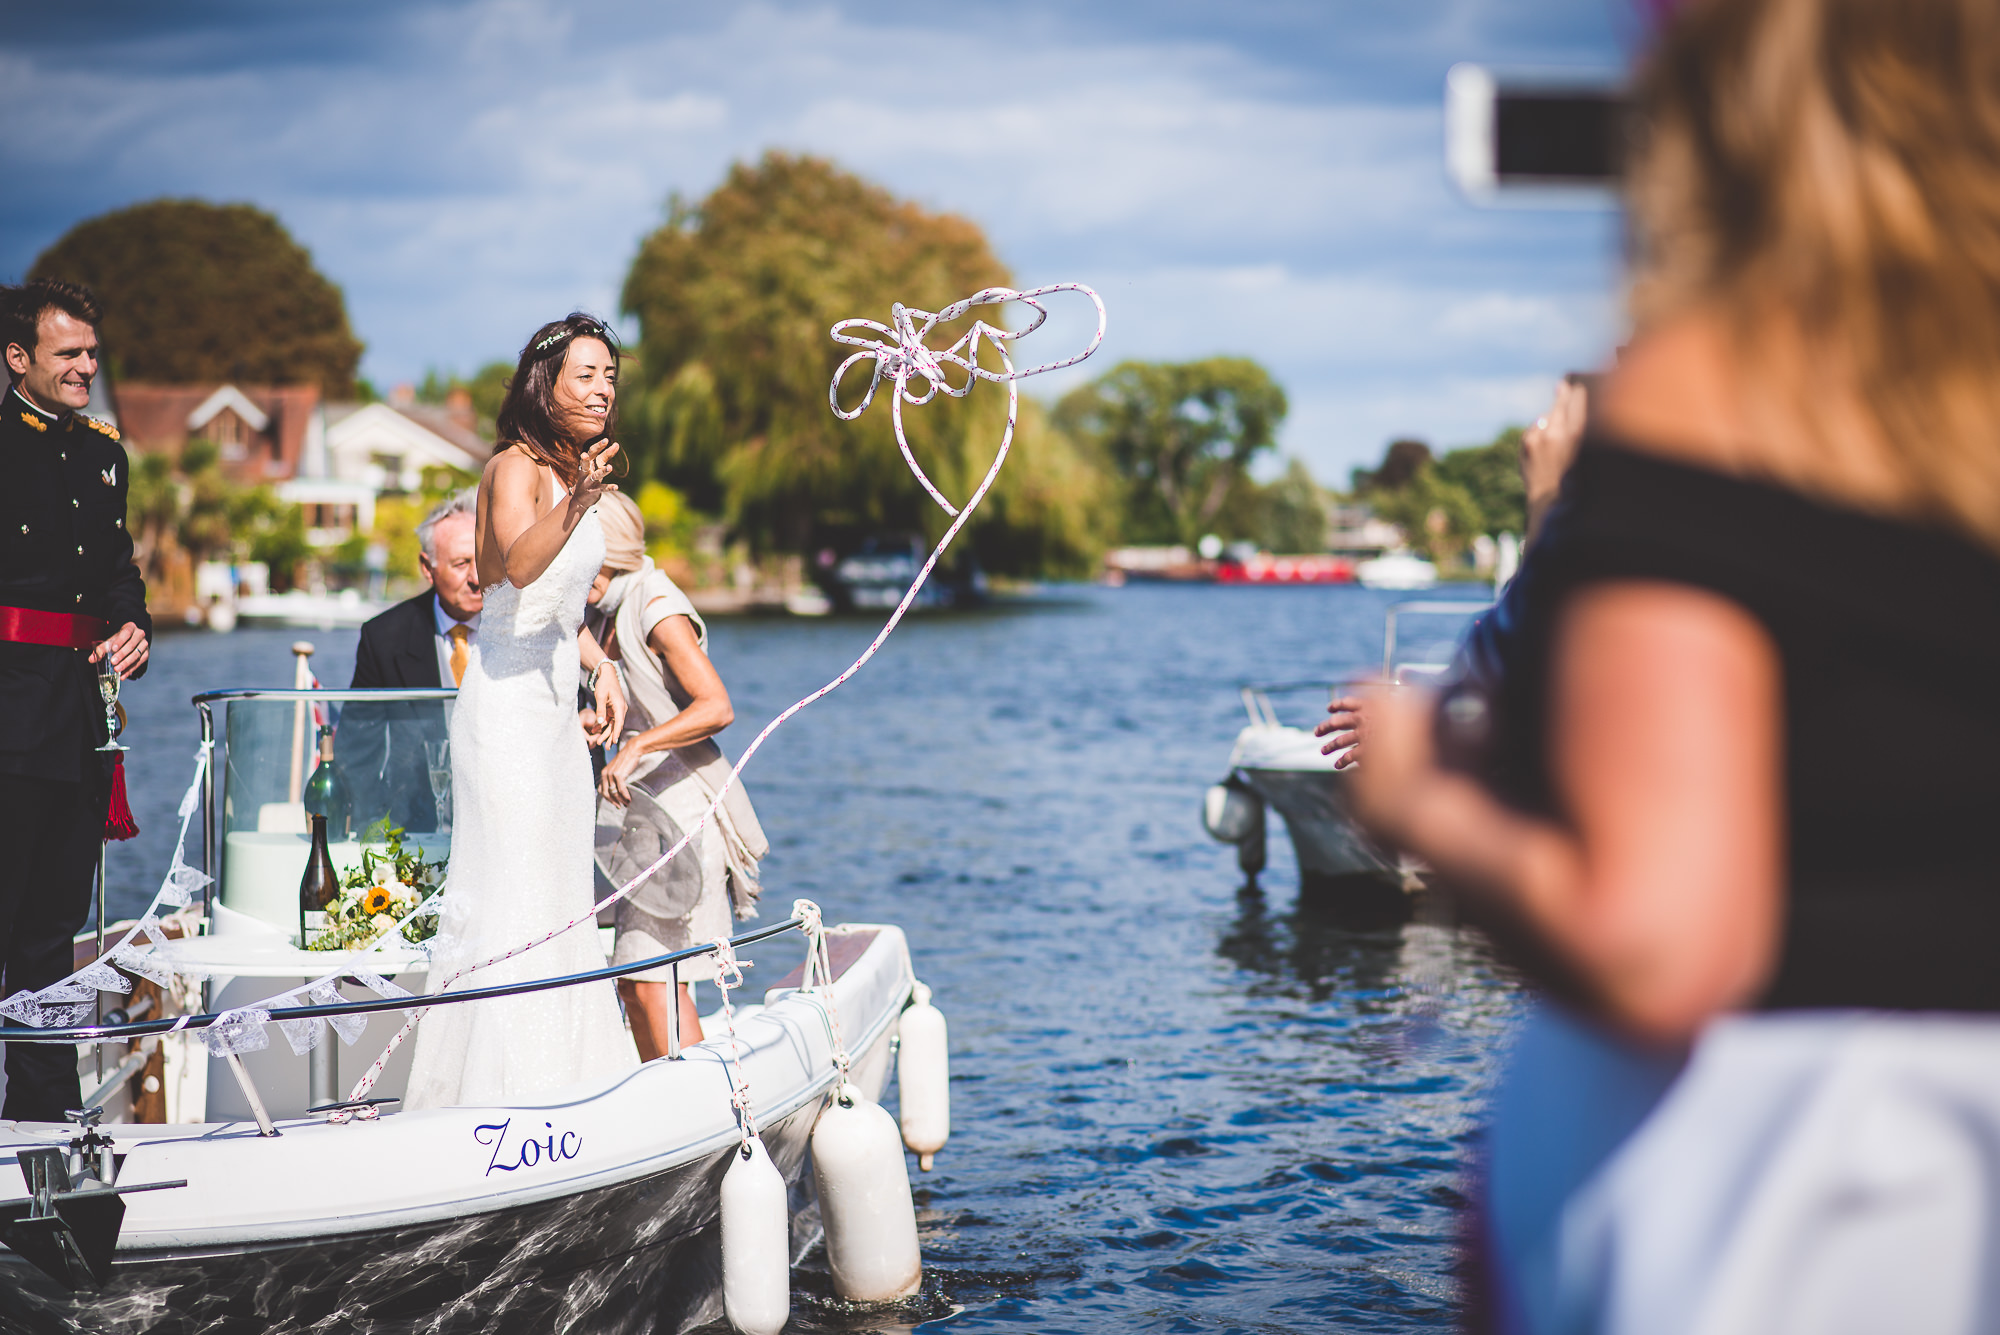 A wedding photo of the groom and bride on a boat with balloons.